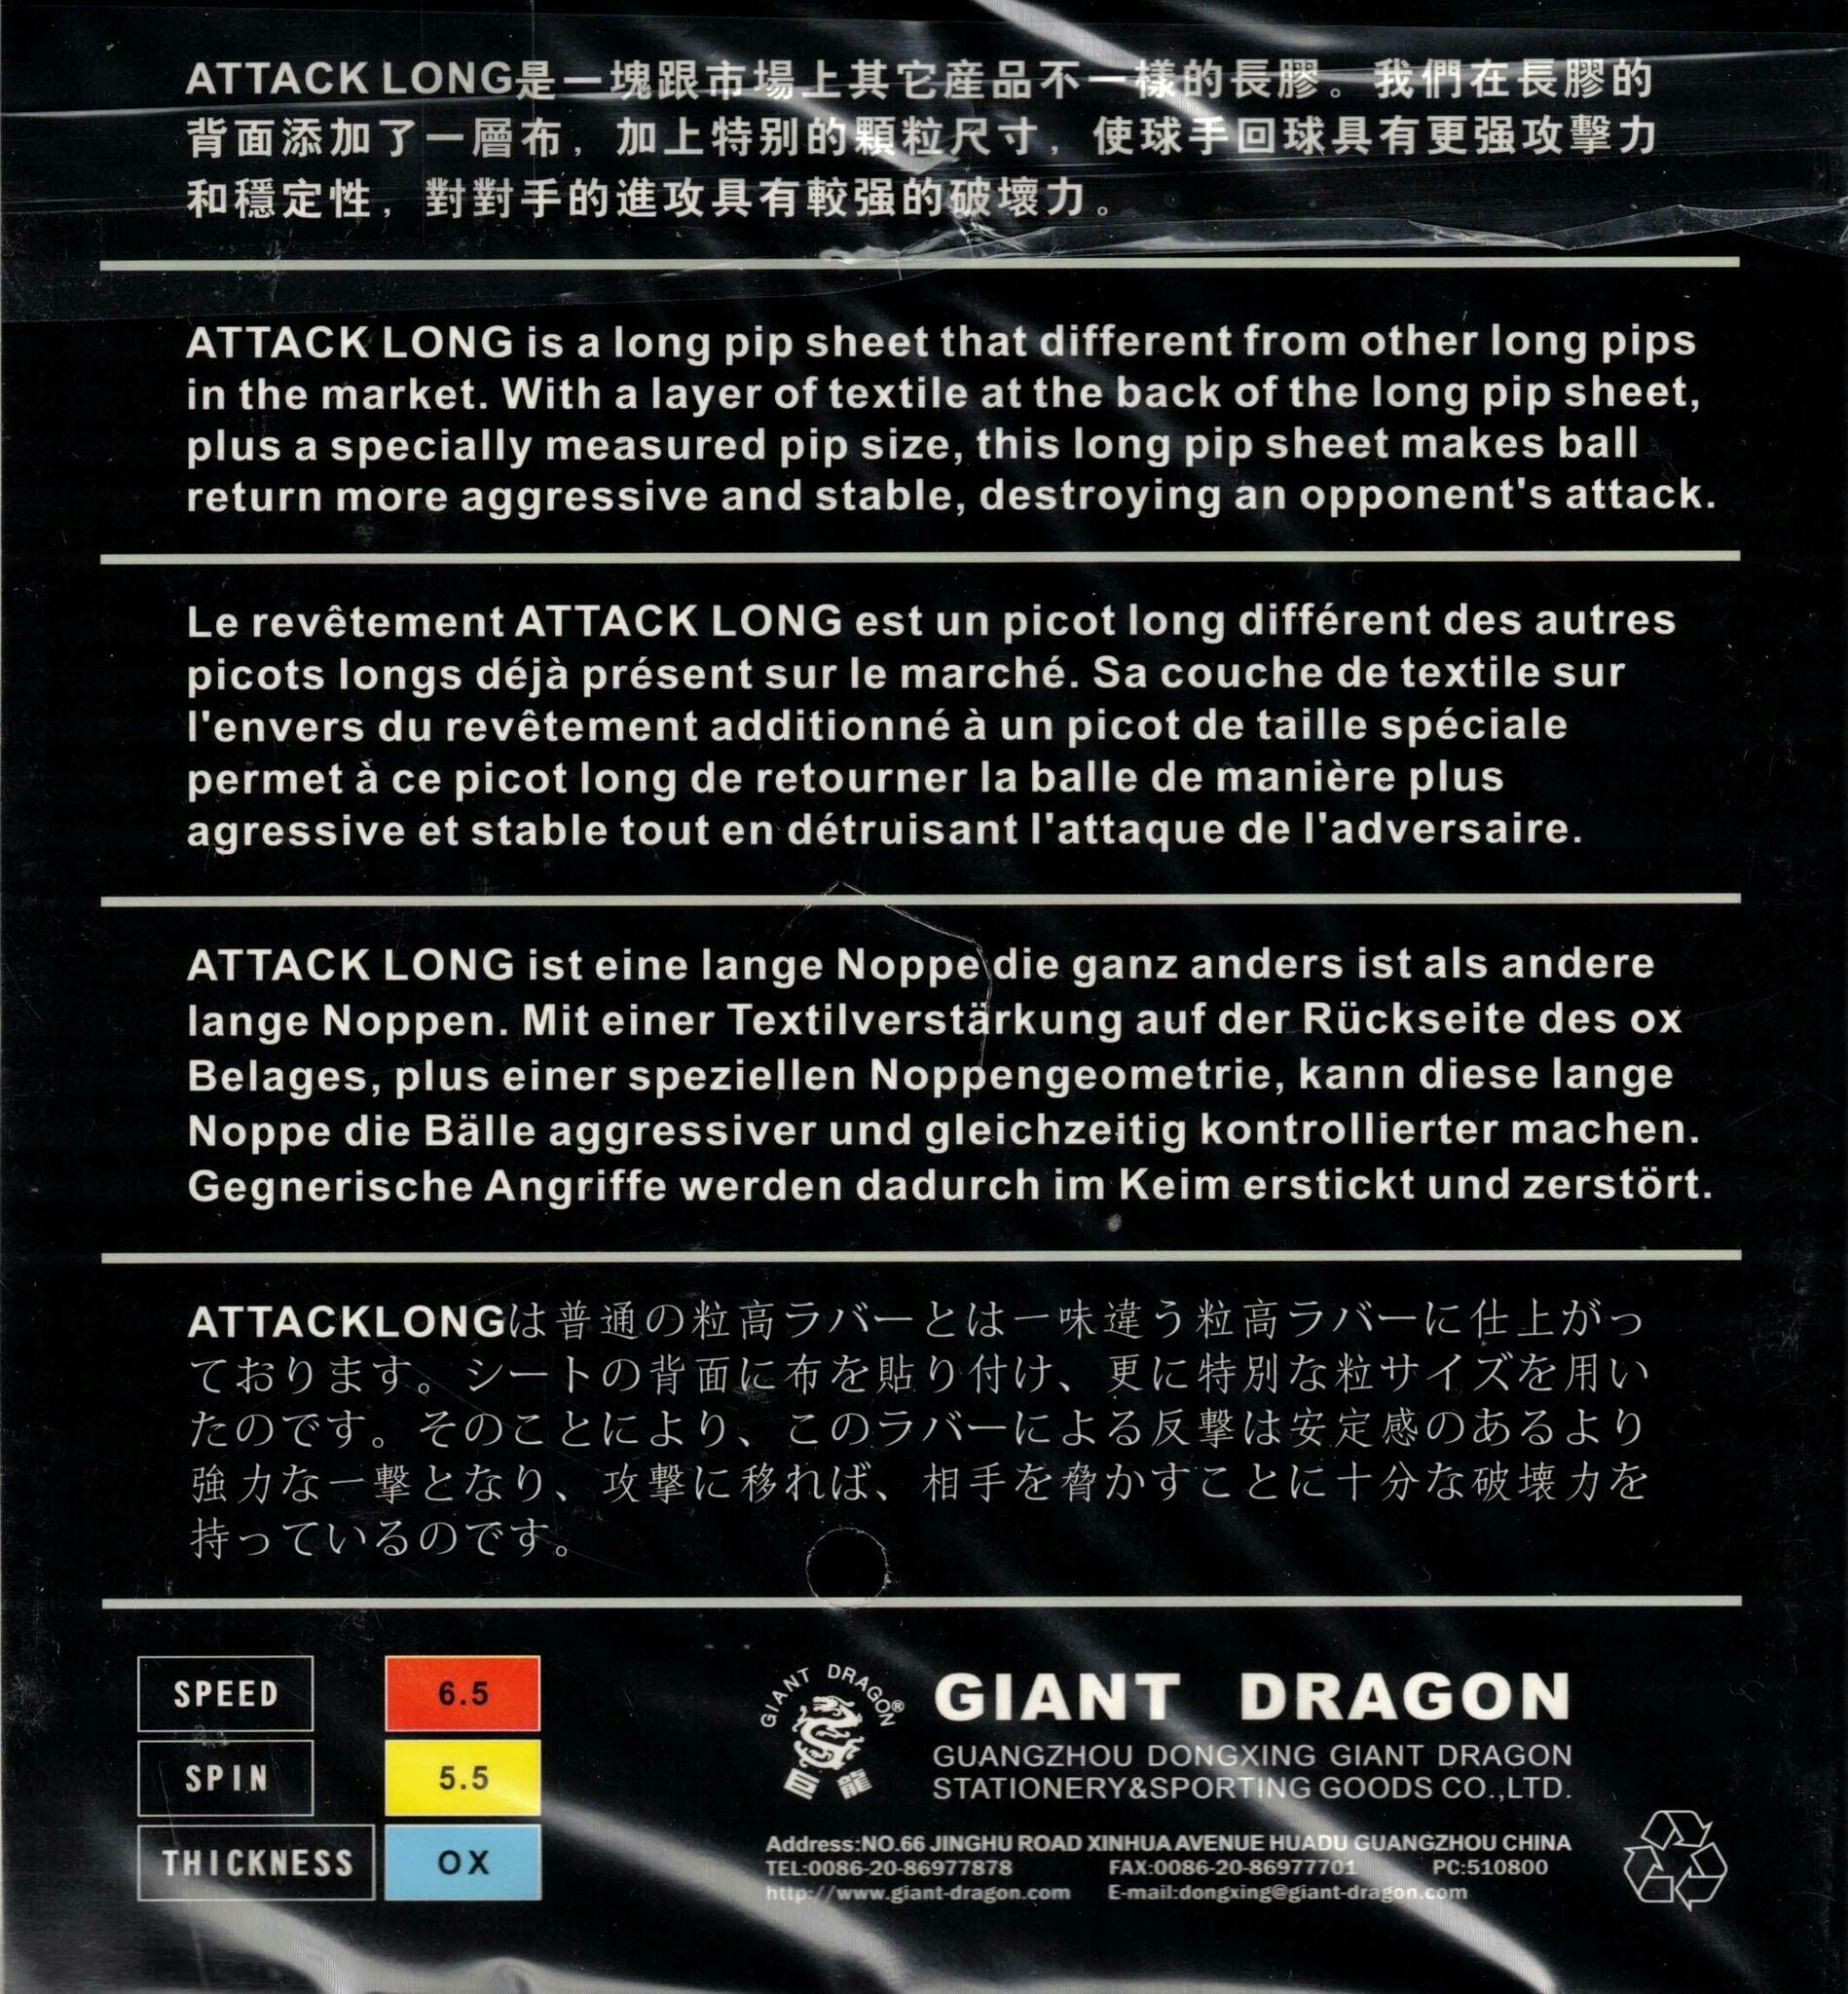 Giant Dragon - Attack Long